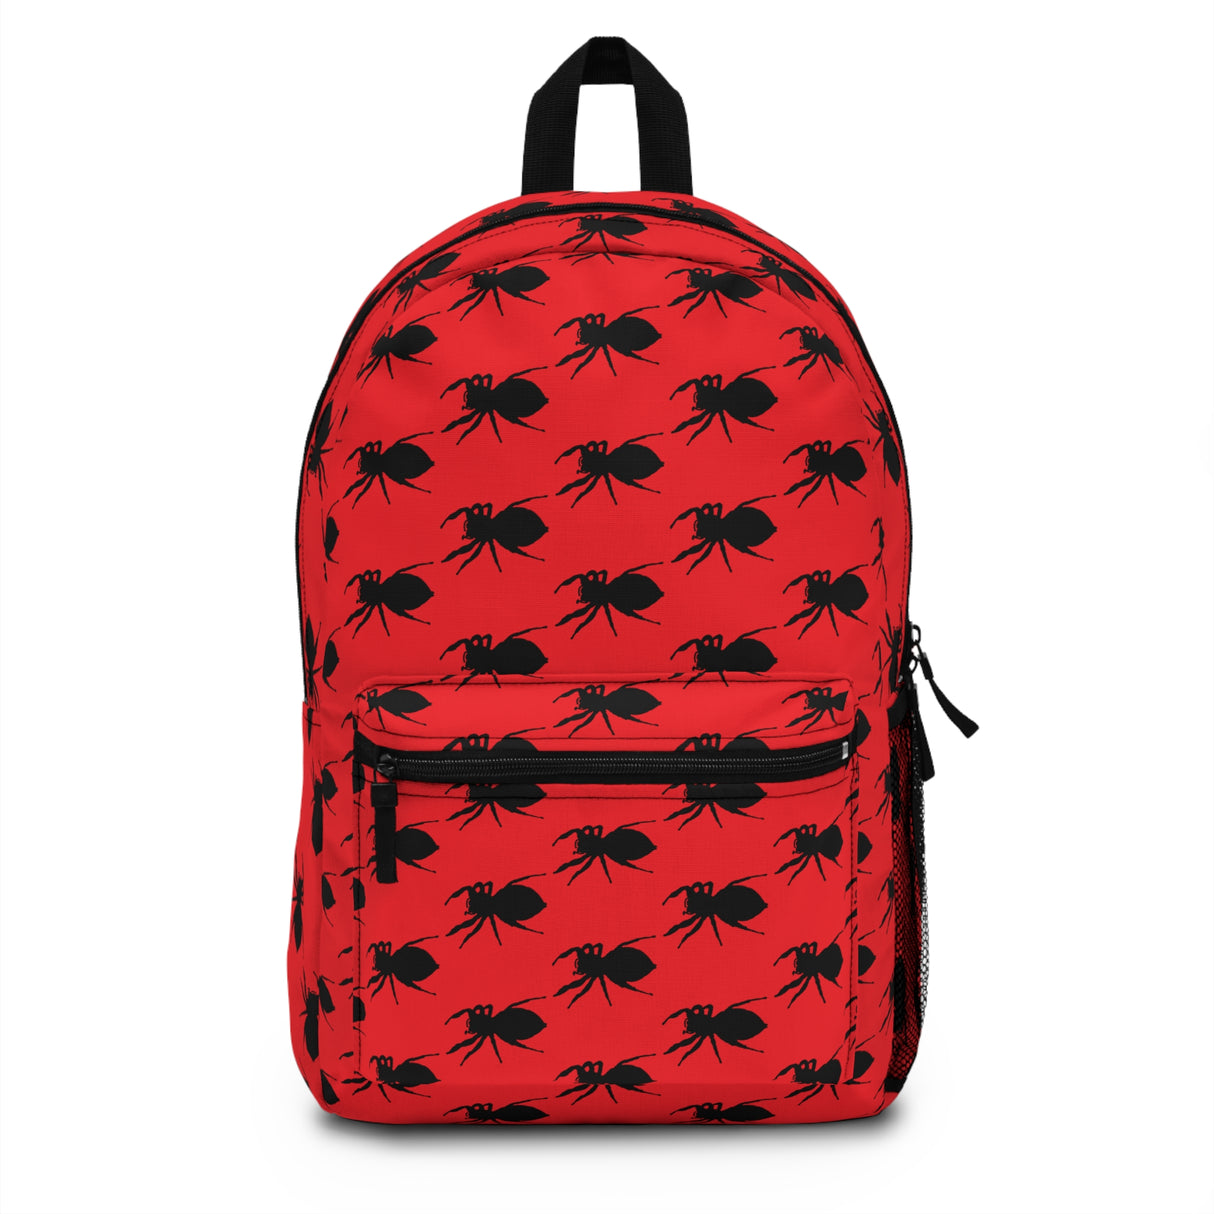 Jumping Spider Print Backpack Featuring on a Red Background Made in USA